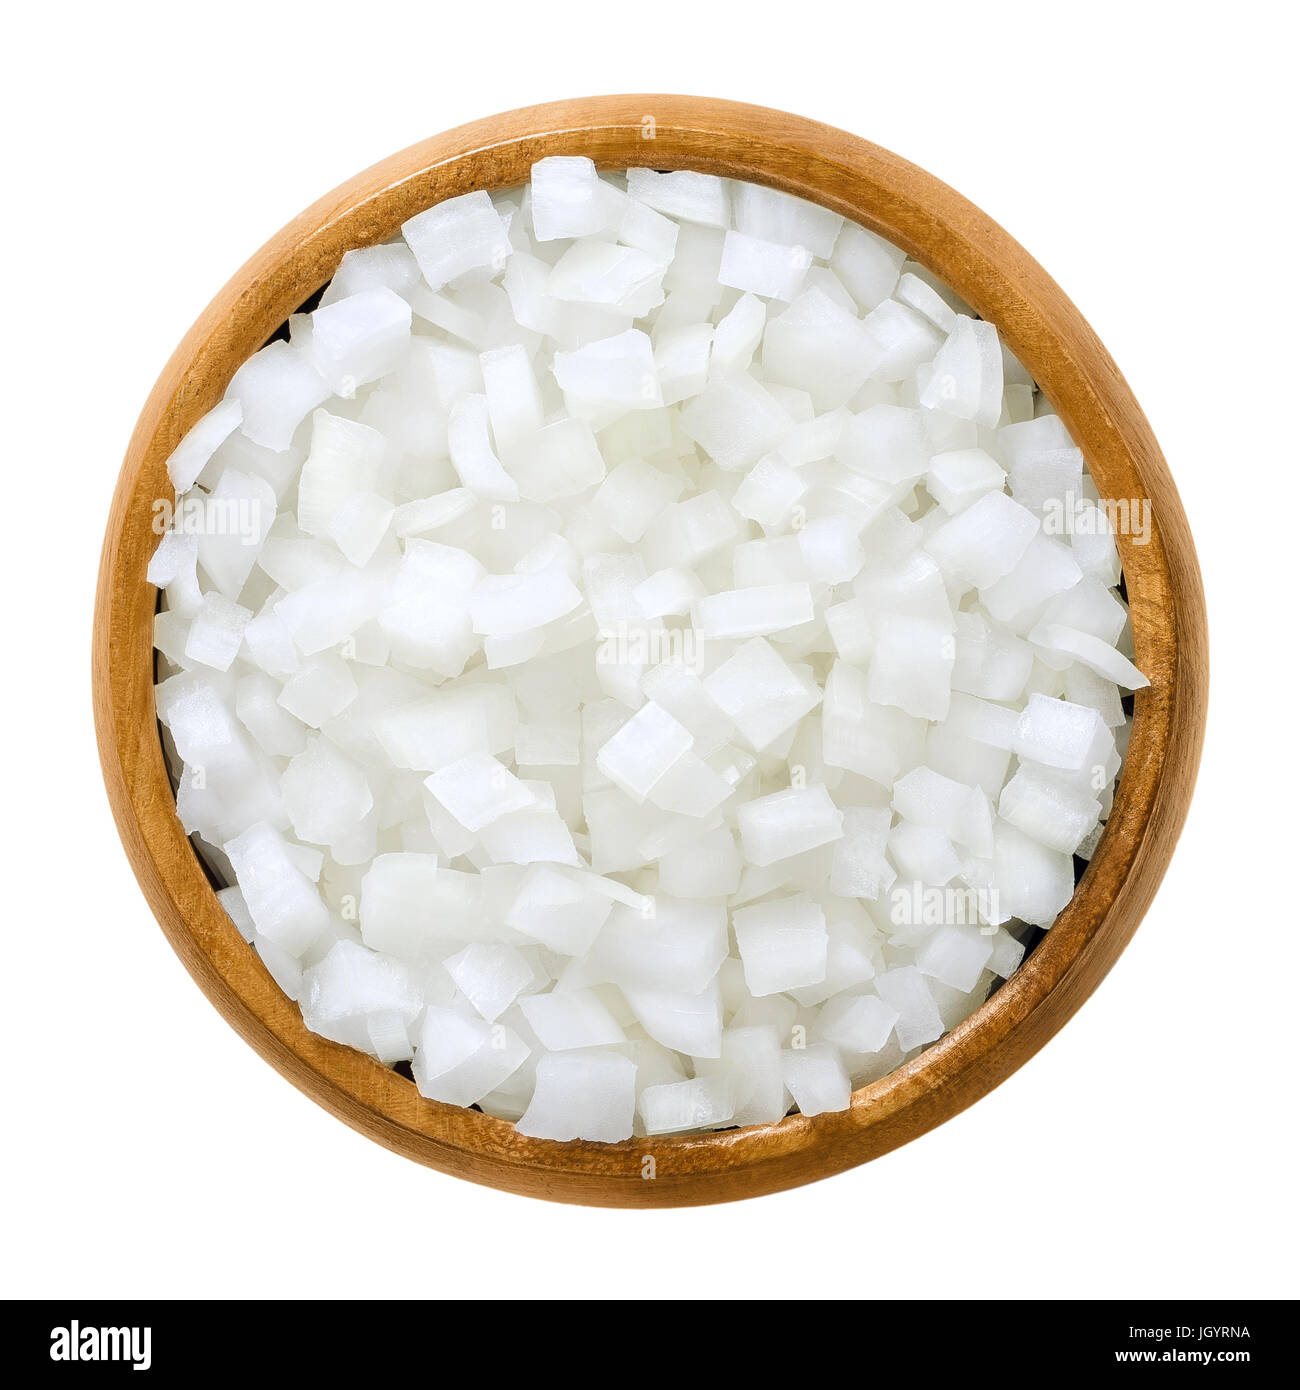 White onion cubes in wooden bowl. Chopped fresh, raw Allium cepa, also bulb or common onion. Vegetable, ingredient and staple food. Macro photo. Stock Photo